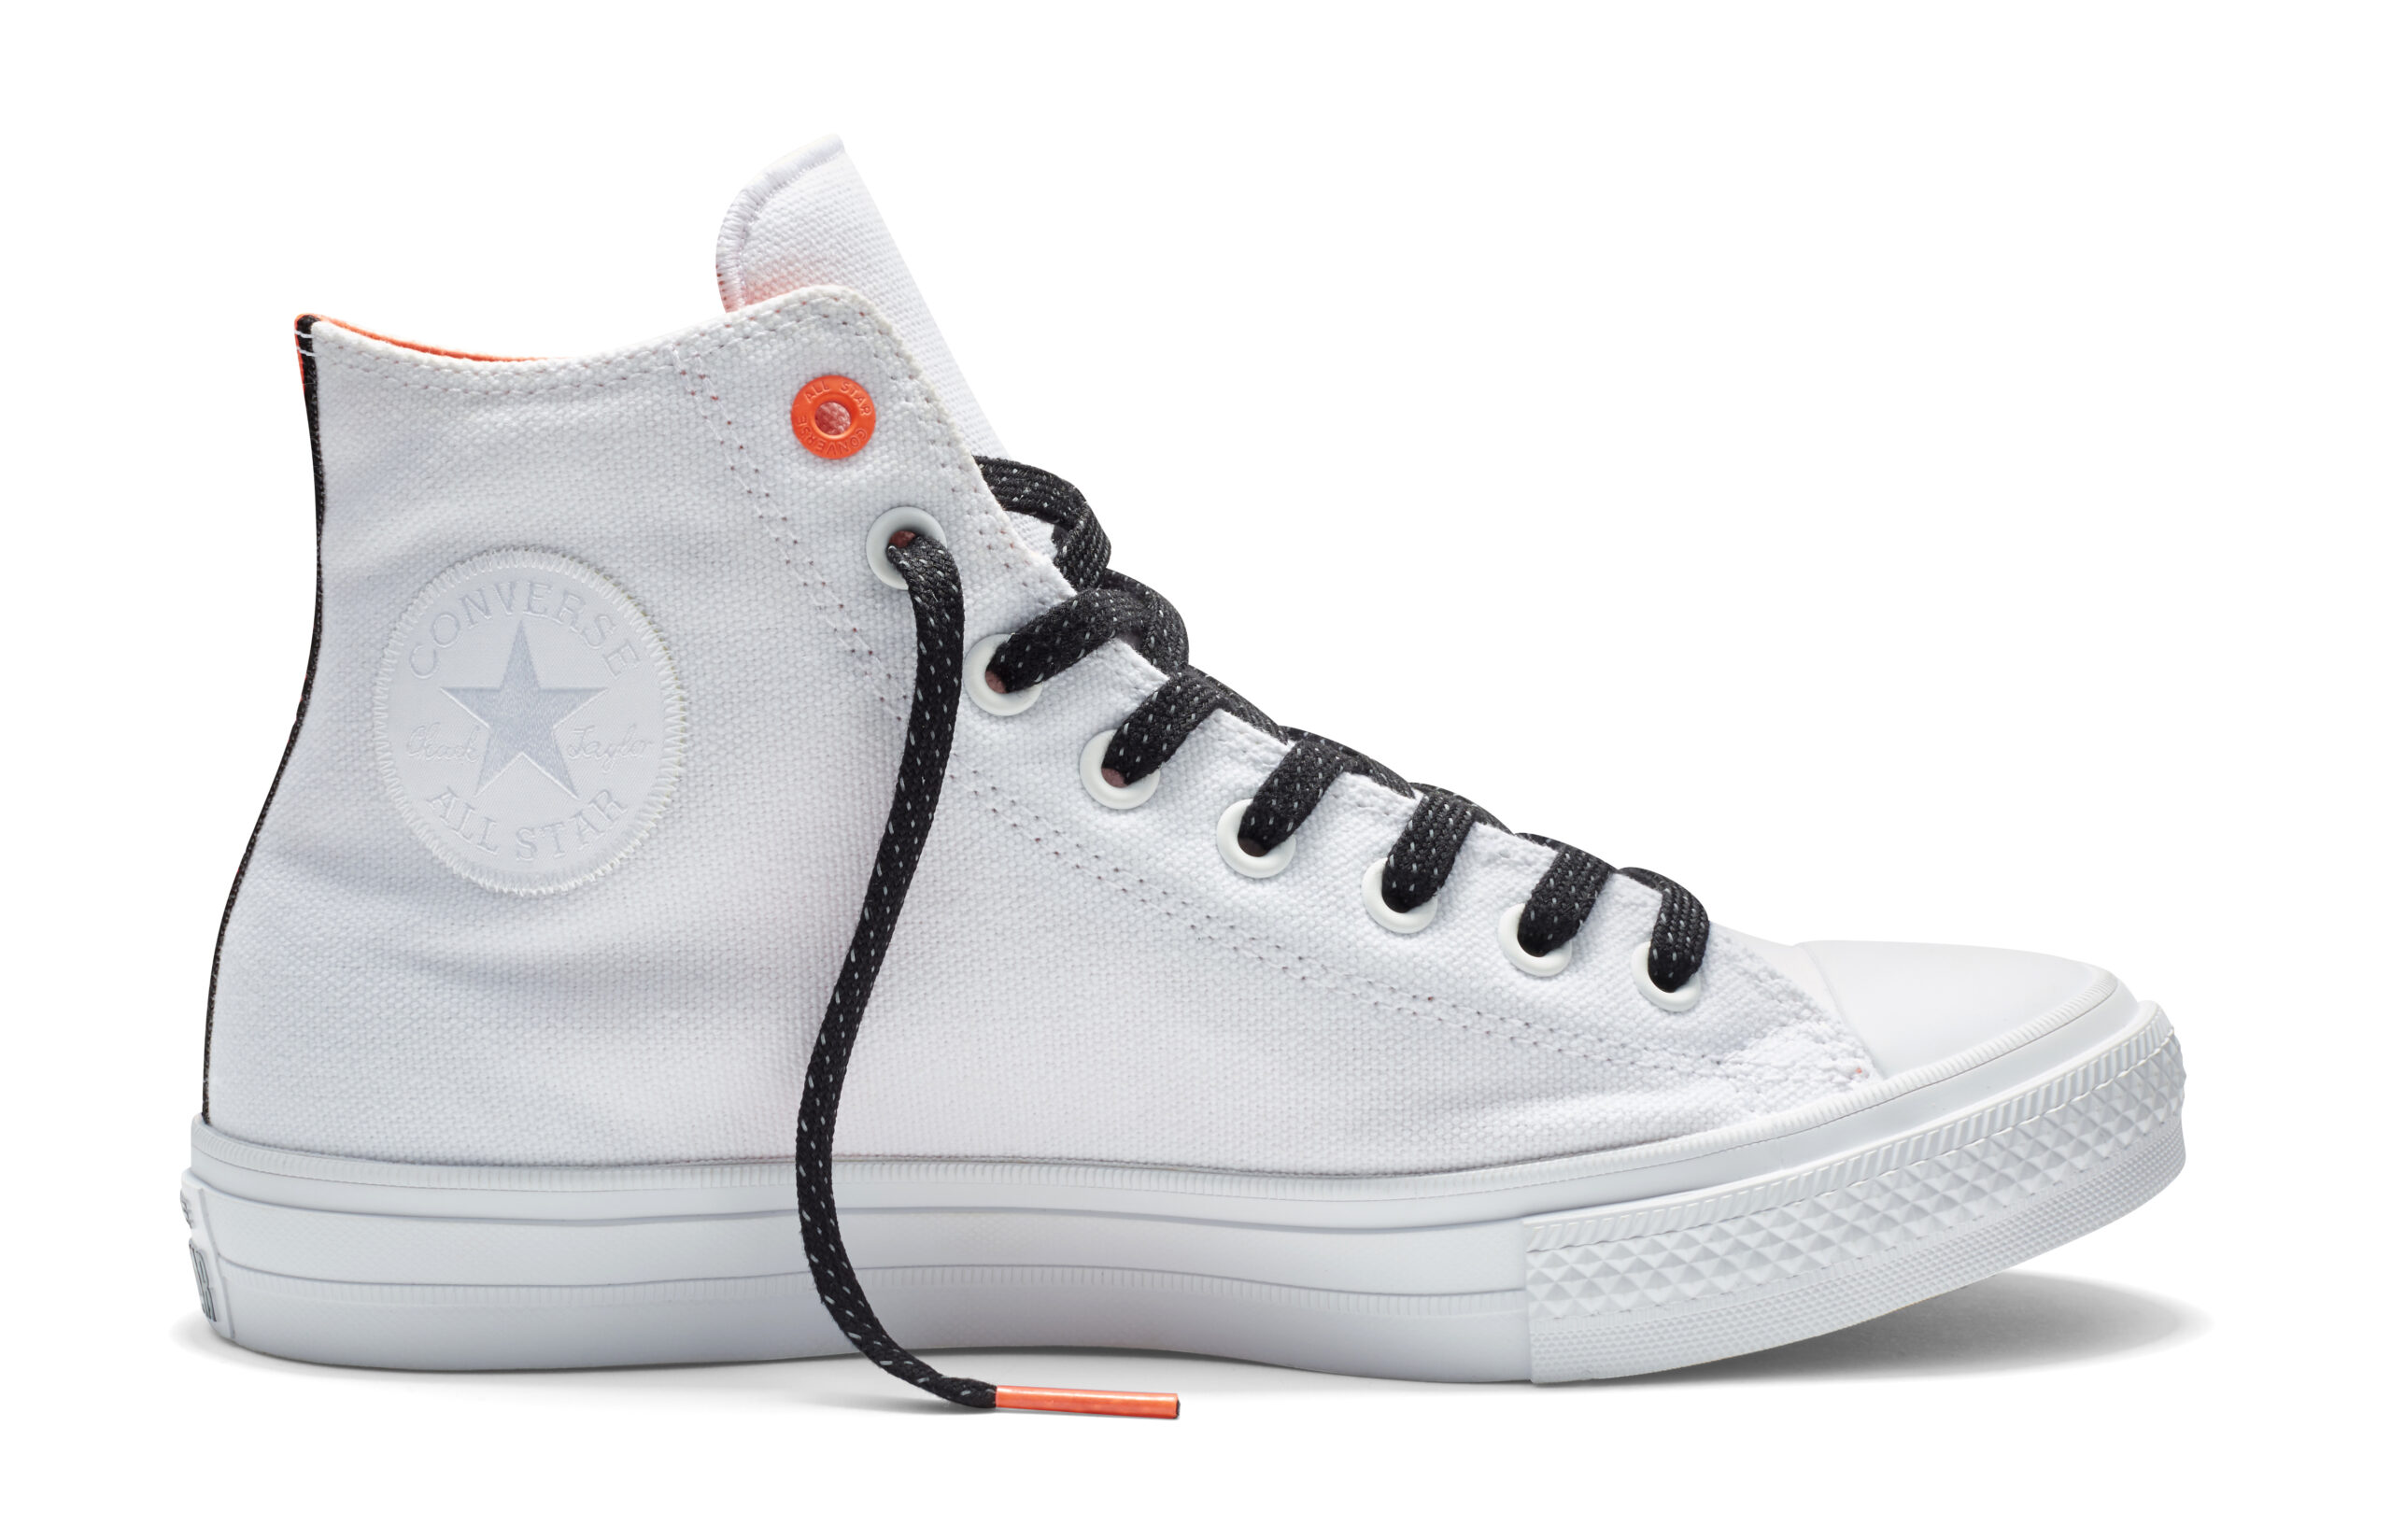 boiler tsunami Mondwater Converse: New Weather-Beating Chucks Unveiled, Available Starting Today -  Hype MY